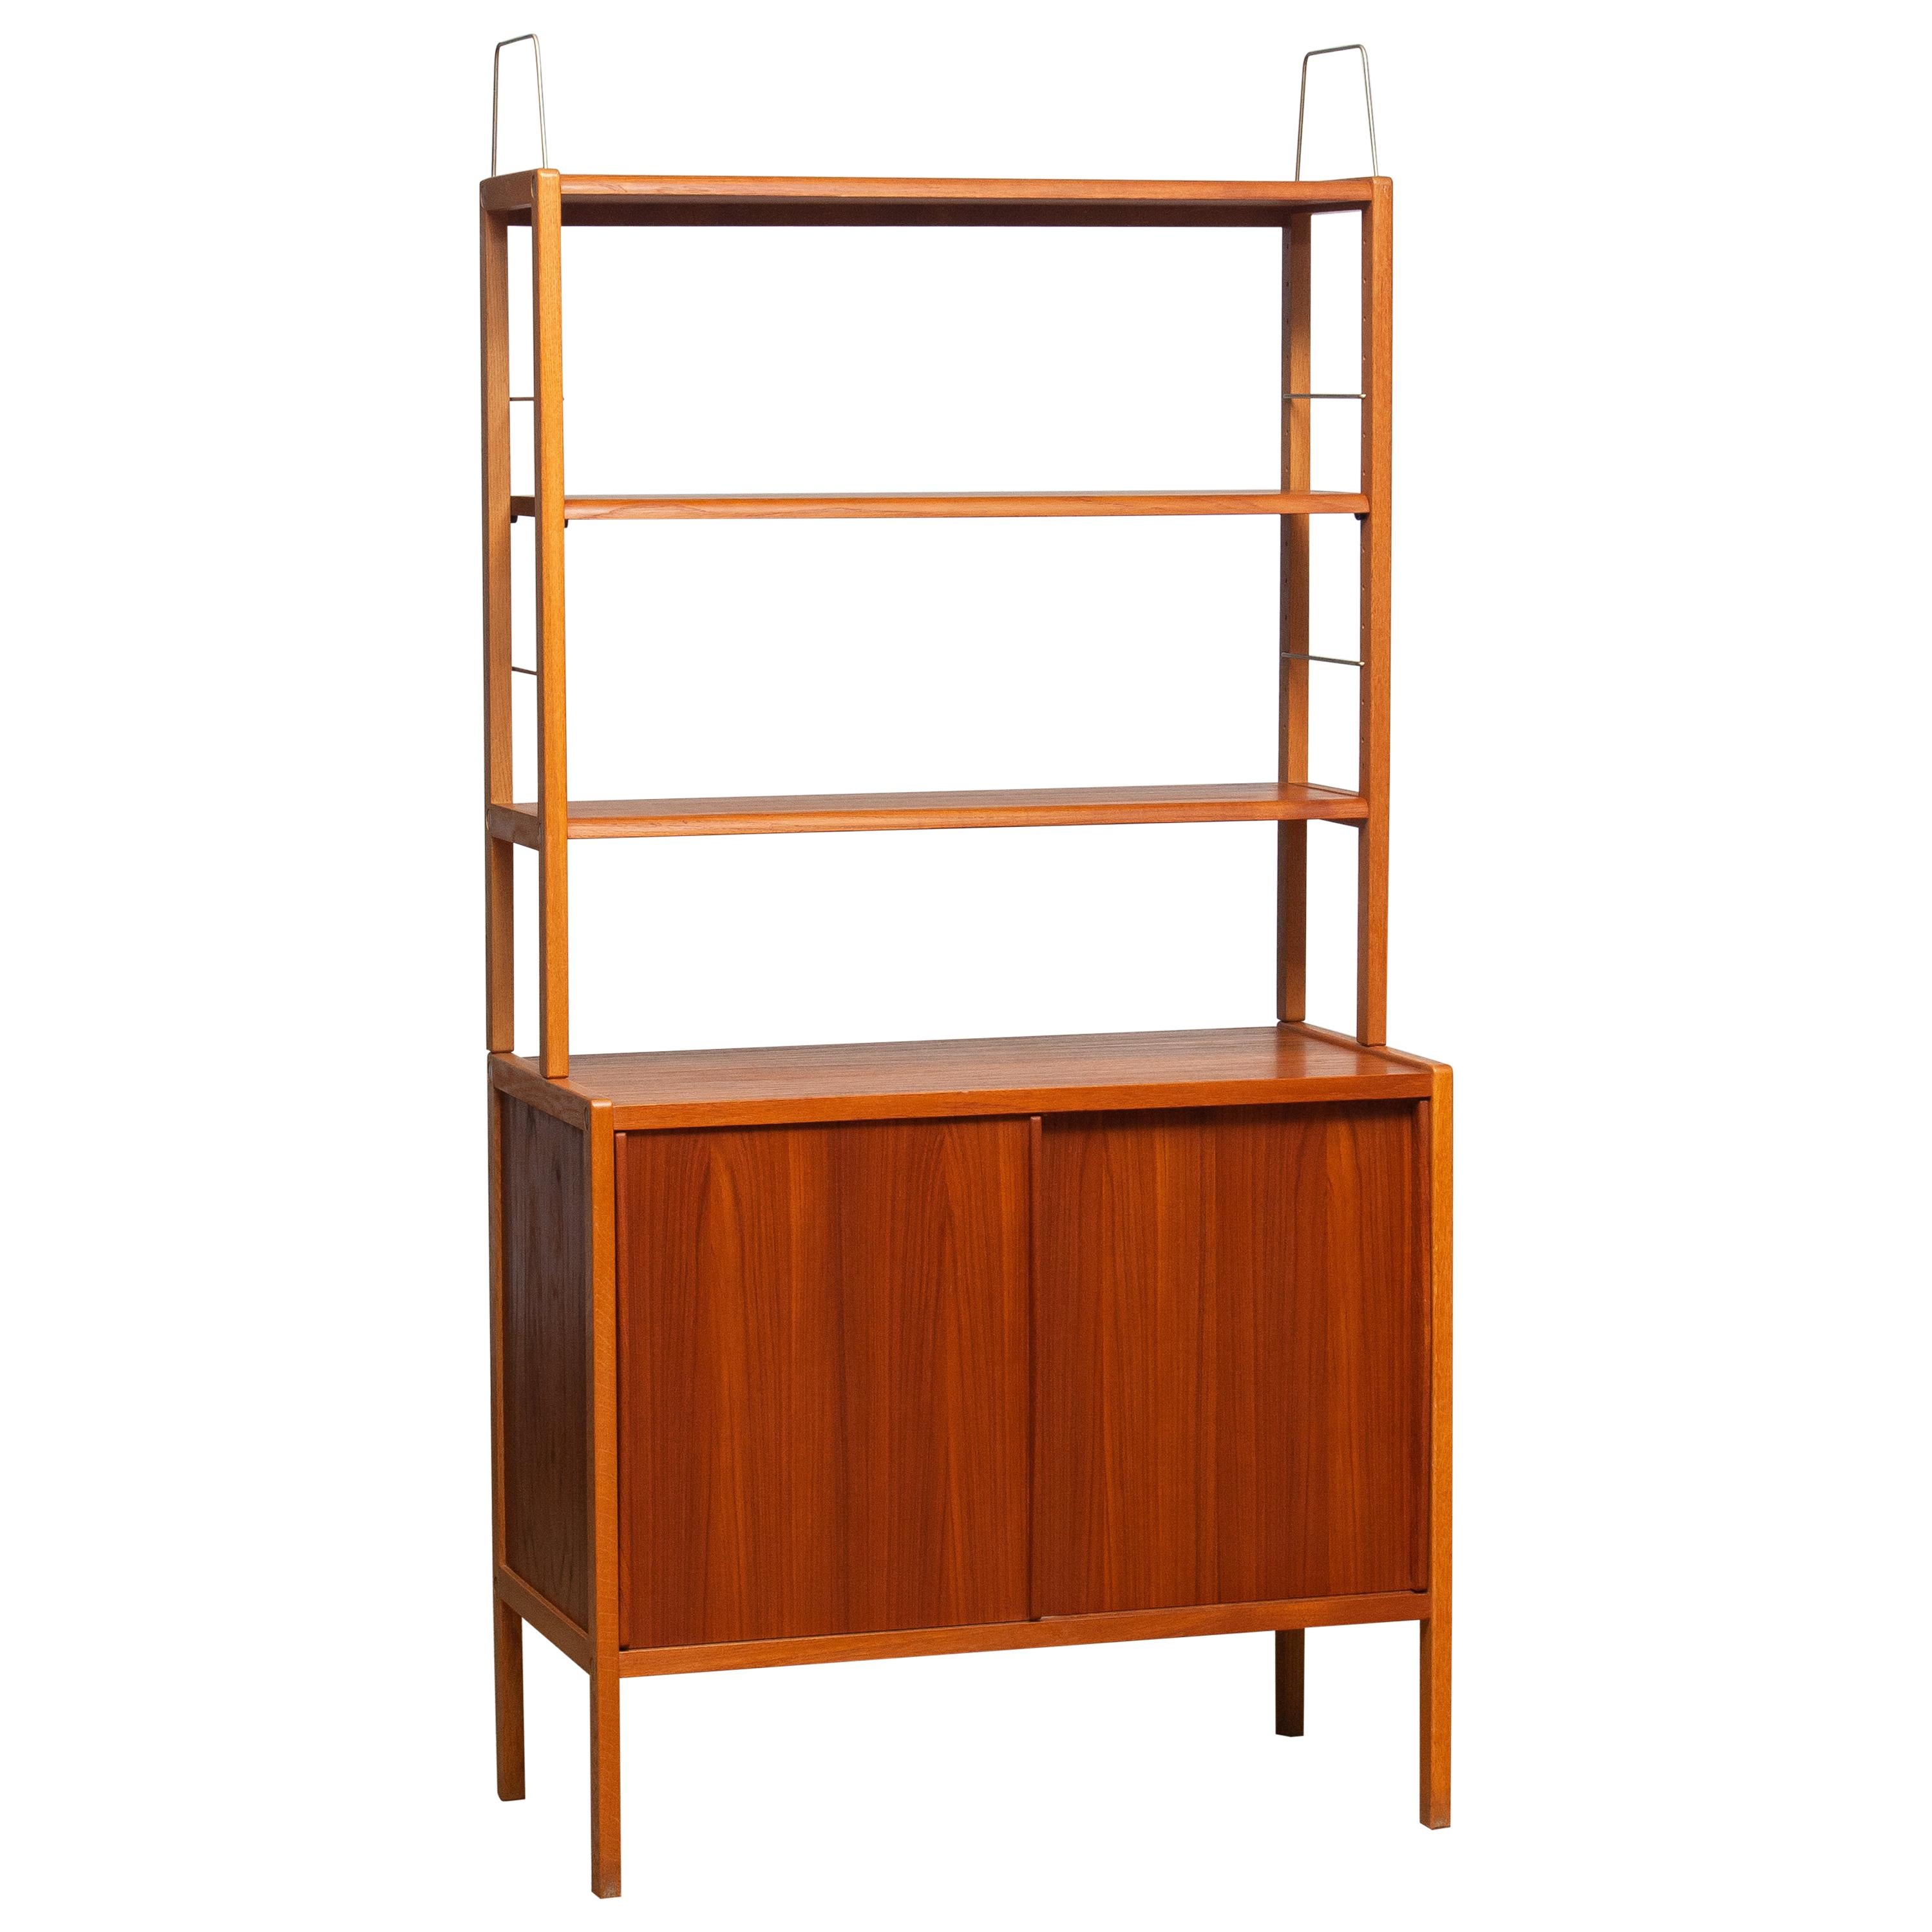 Beautiful and elegant teak bookcase cabinet with brass details by Bertil Fridhagen for Bodafors, Sweden, 1960s.

The lower part of the cabinet has two sliding doors and inside the original shelf with logo 